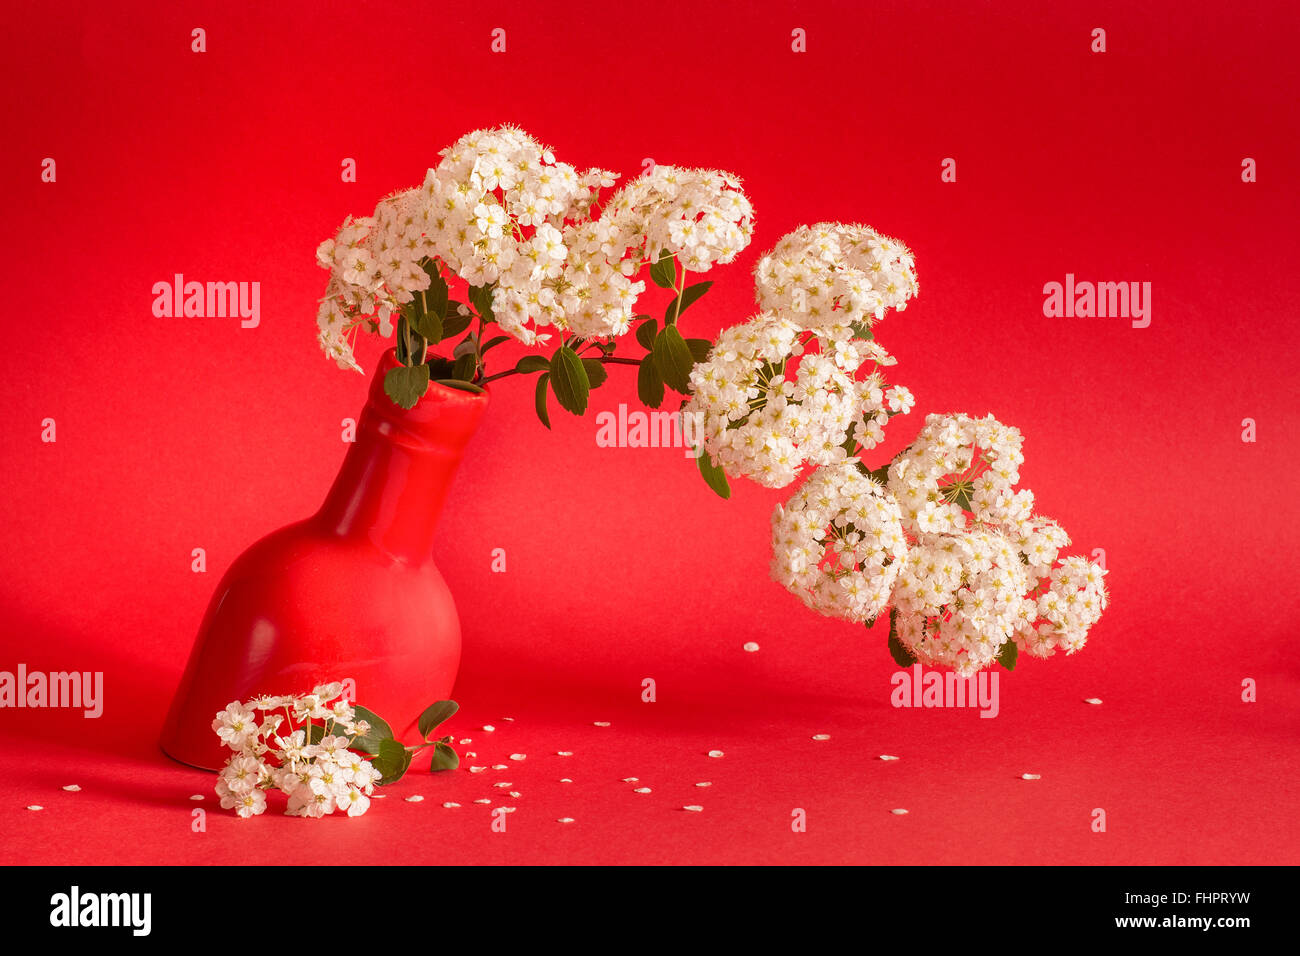 Elegant floral still life of a bunch of white Bridal wreath spirea flowers in a  red bottle shaped vase on  red background. Frontal horizontal view. Stock Photo